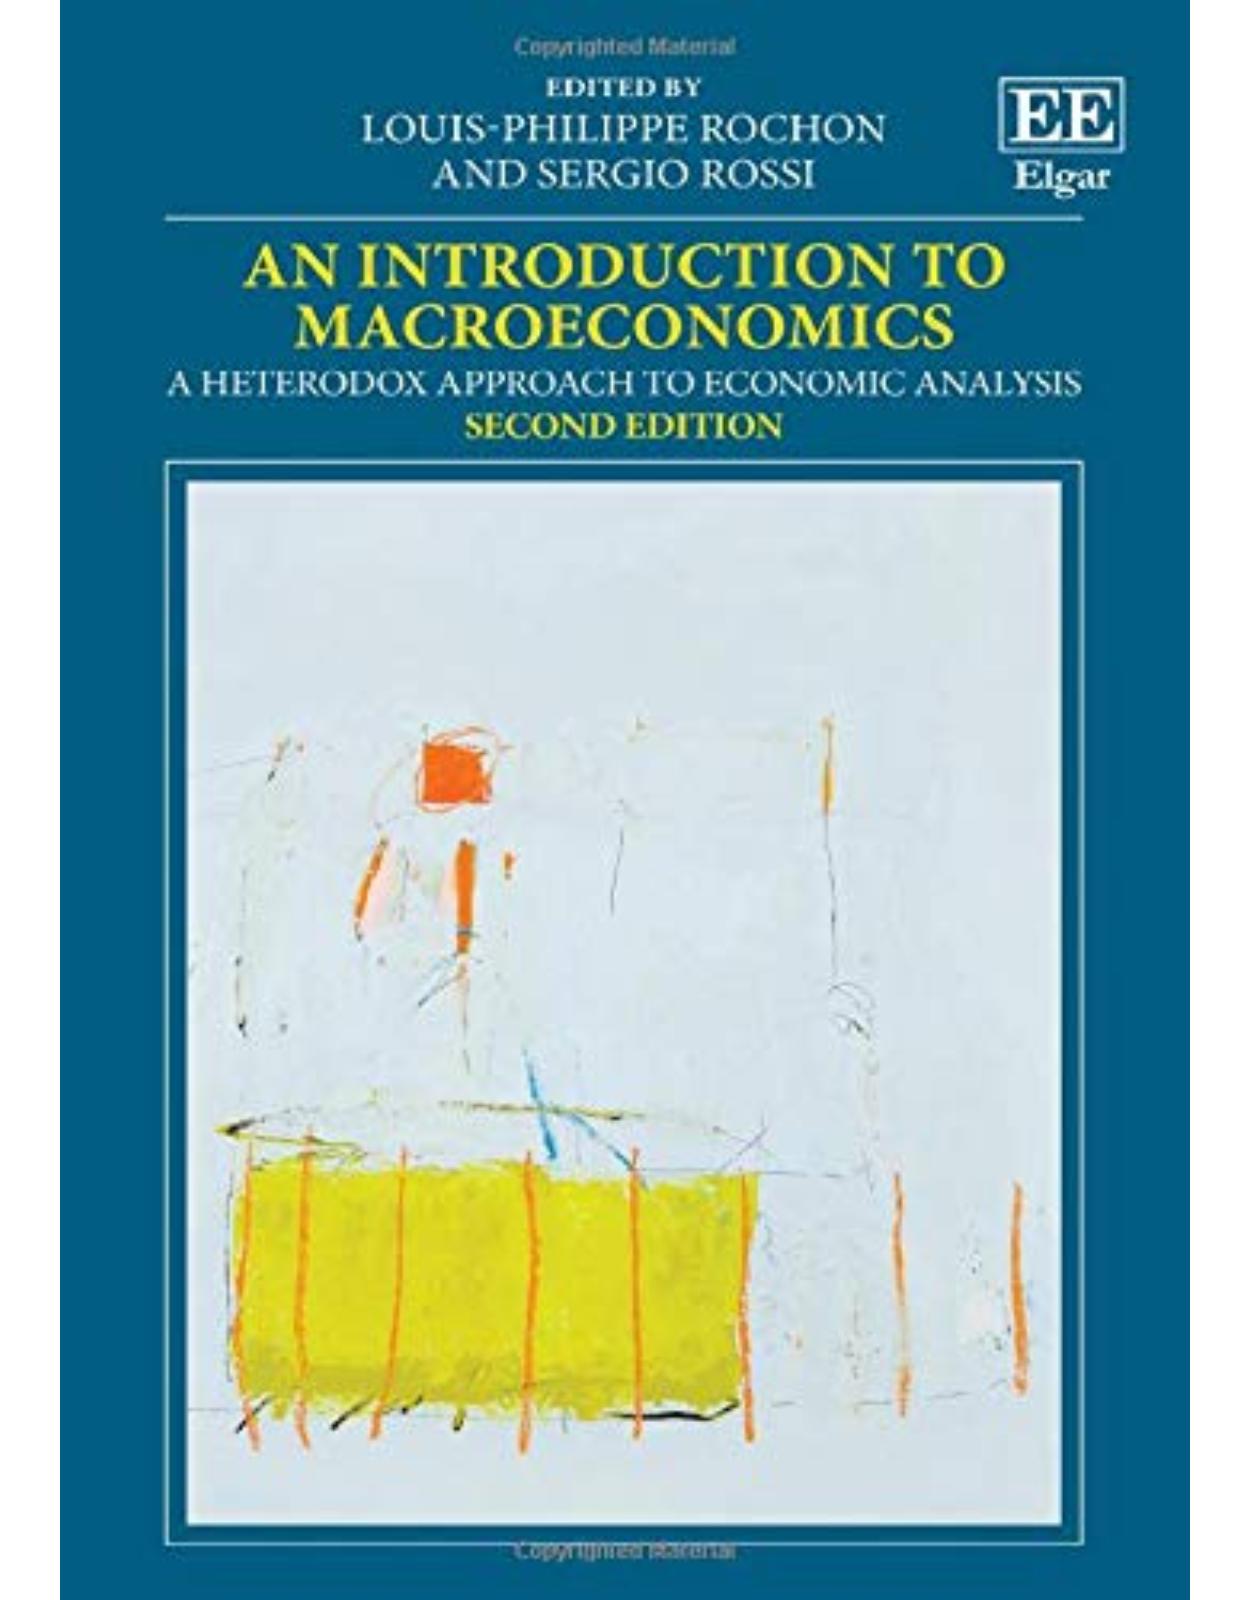 An Introduction to Macroeconomics: A Heterodox Approach to Economic Analysis 